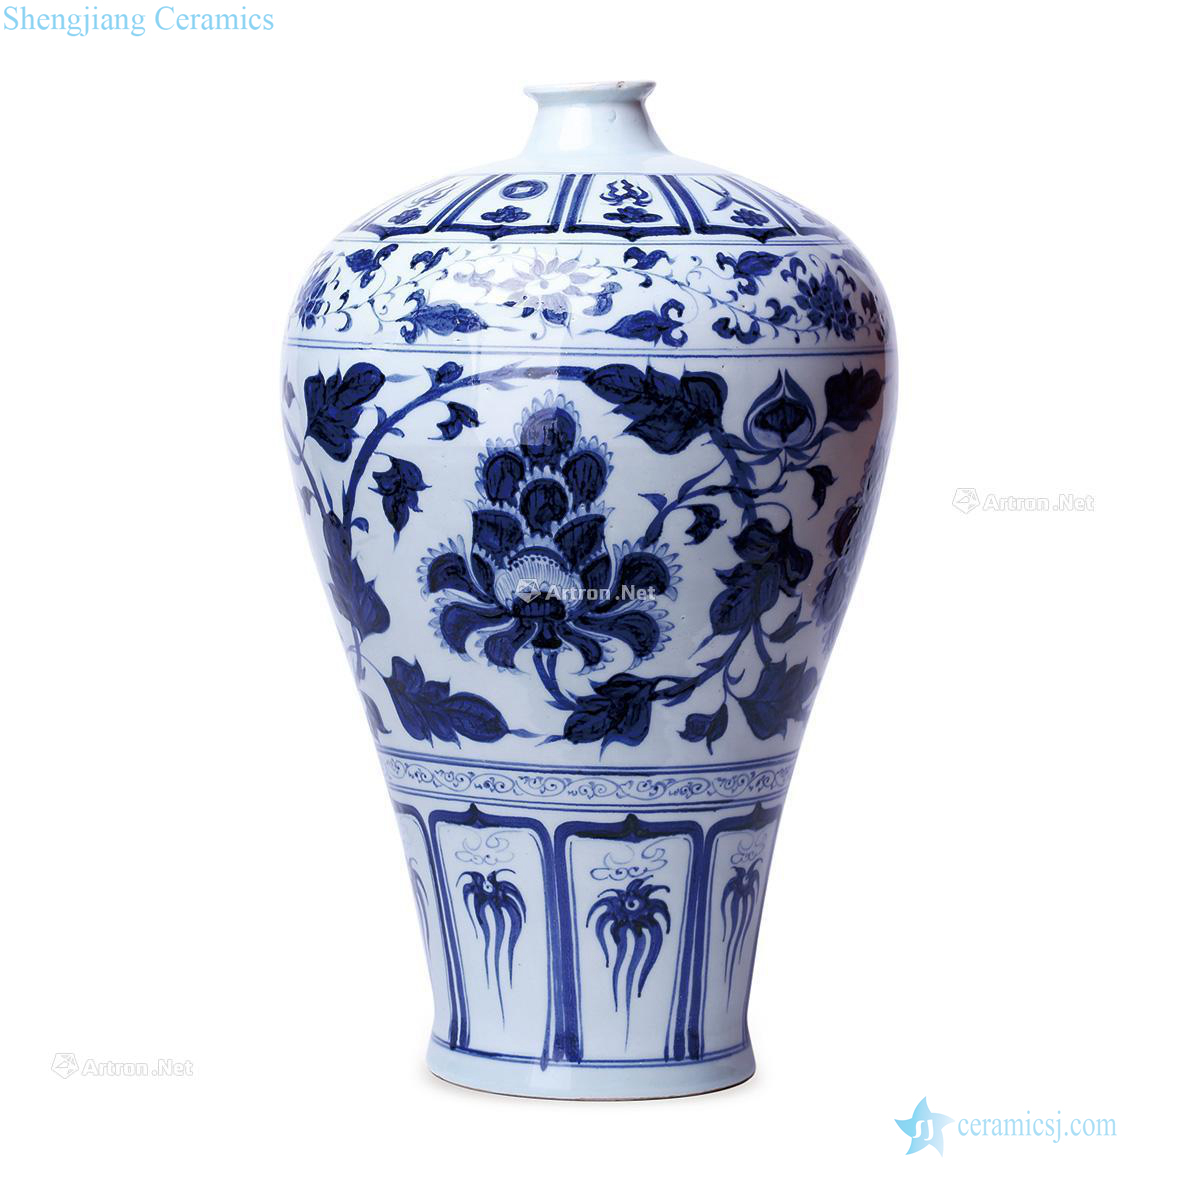 At the end of the yuan Ming Blue and white peony grain mei bottle